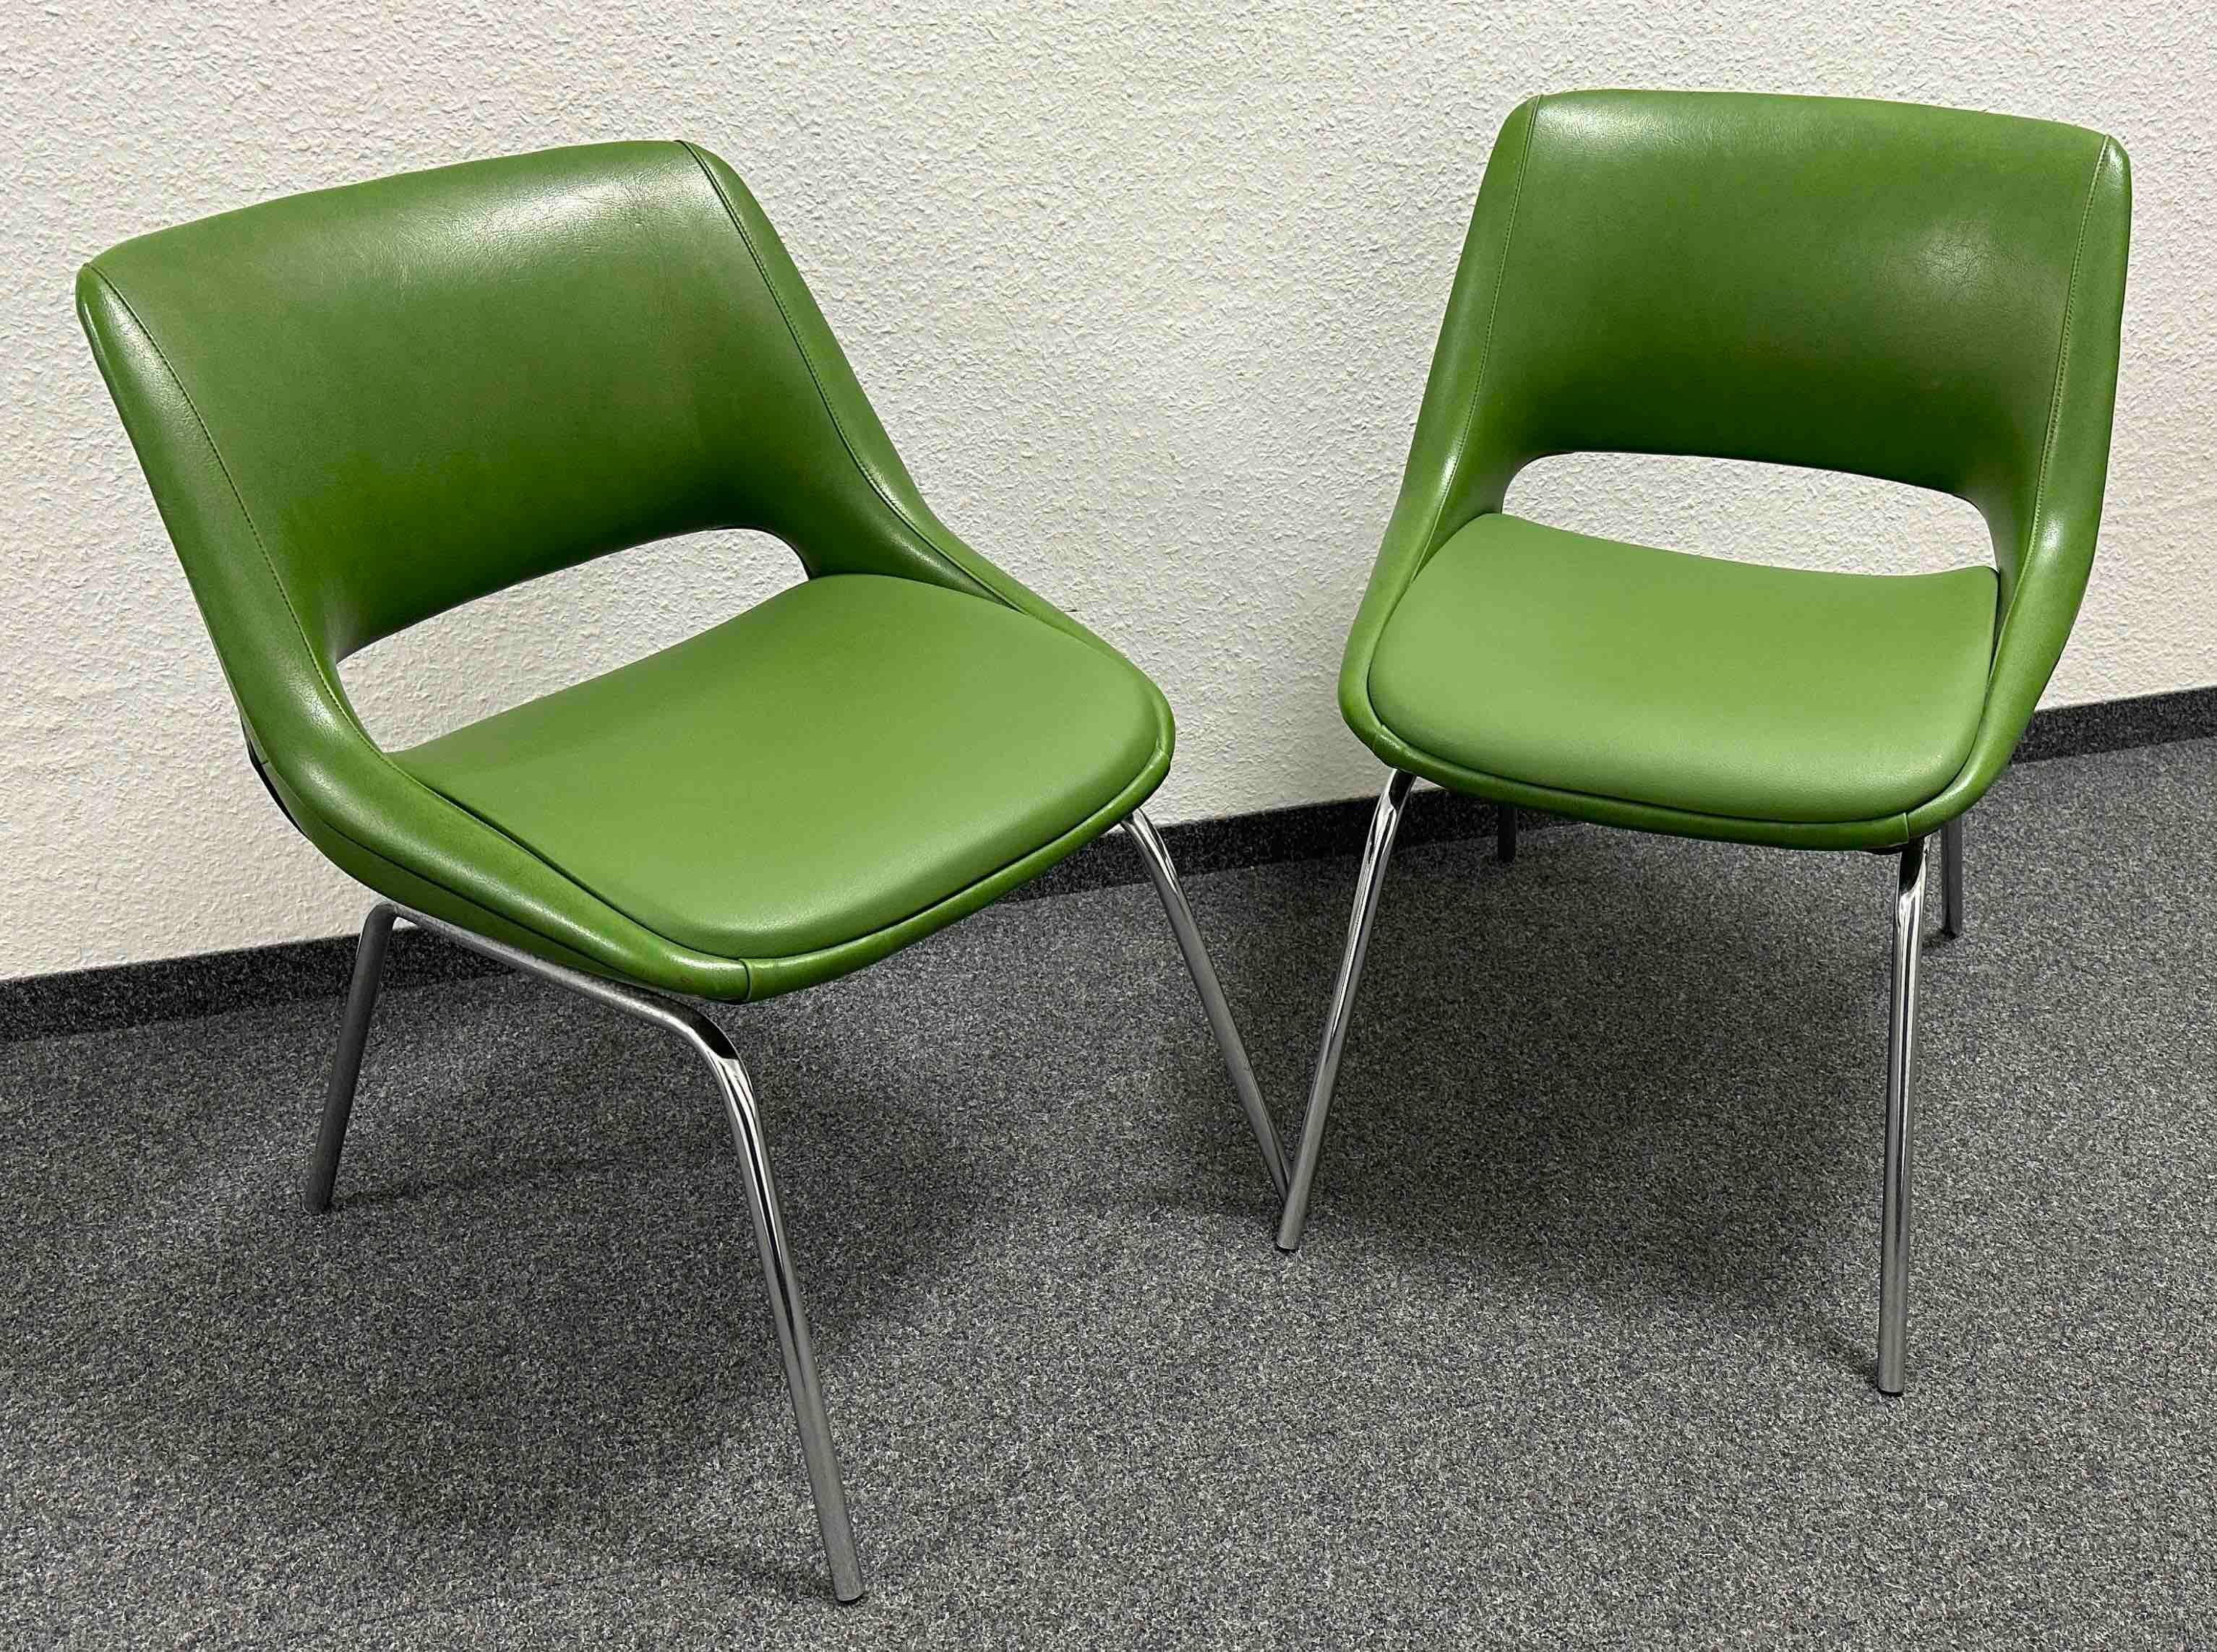 Two Chrome Base, Green Faux Leather Chairs Made by Blaha, Austria, 1970s For Sale 7